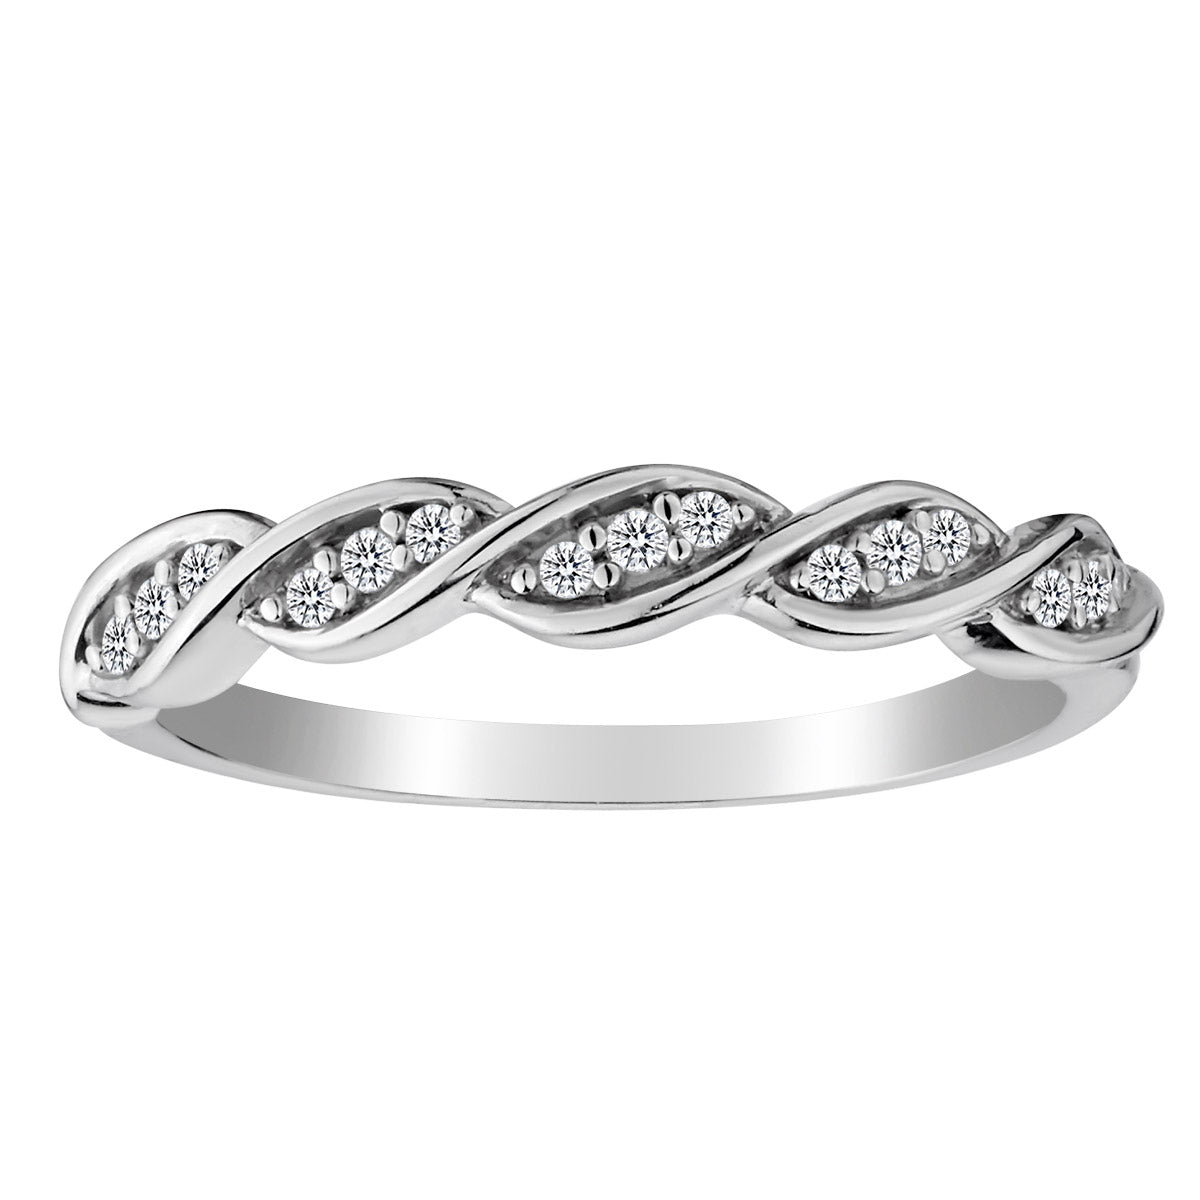 .10 Carat of Diamonds Band, 10kt White Gold.......................NOW